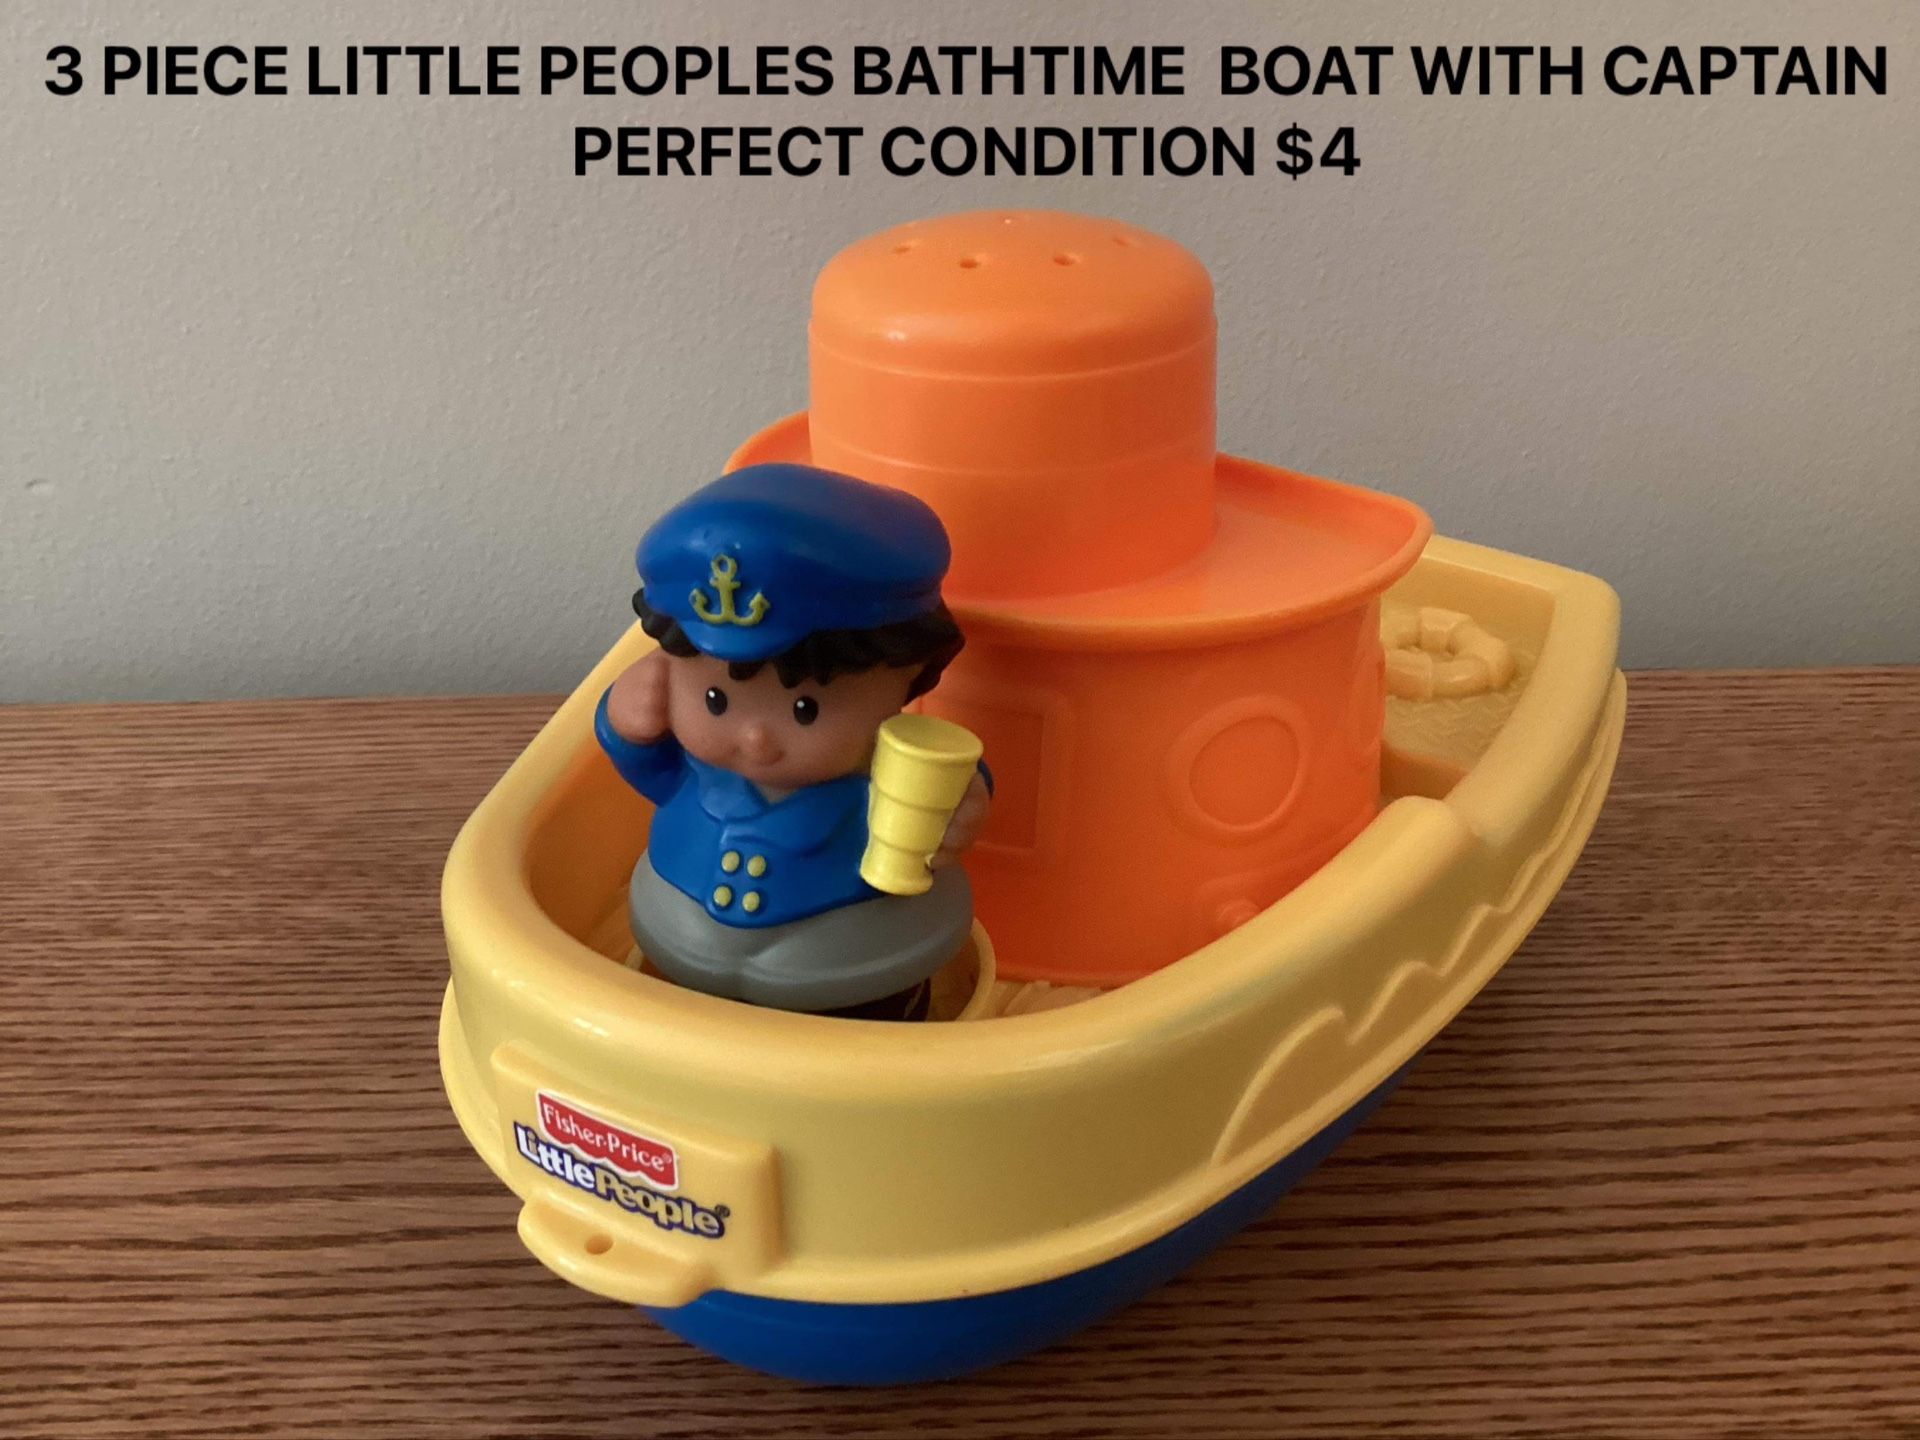 LITTLE PEOPLES BATHTIME BOAT WITH CAPTAIN, PERFECT CONDITION 